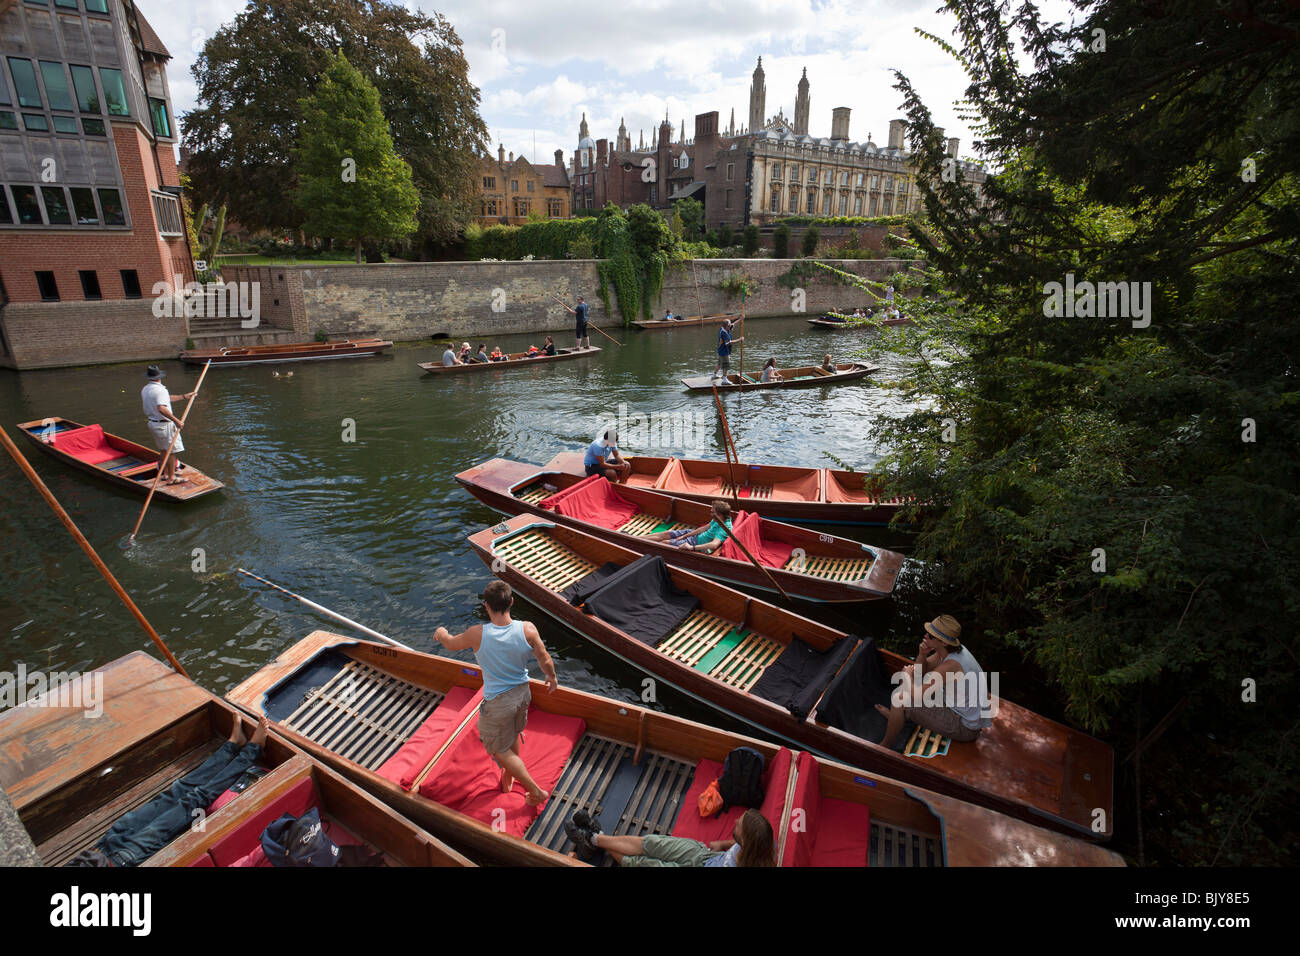 Cambridge Tourism - Independent Punt operators prepare to take tourists on the River Cam in central Cambridge UK Stock Photo